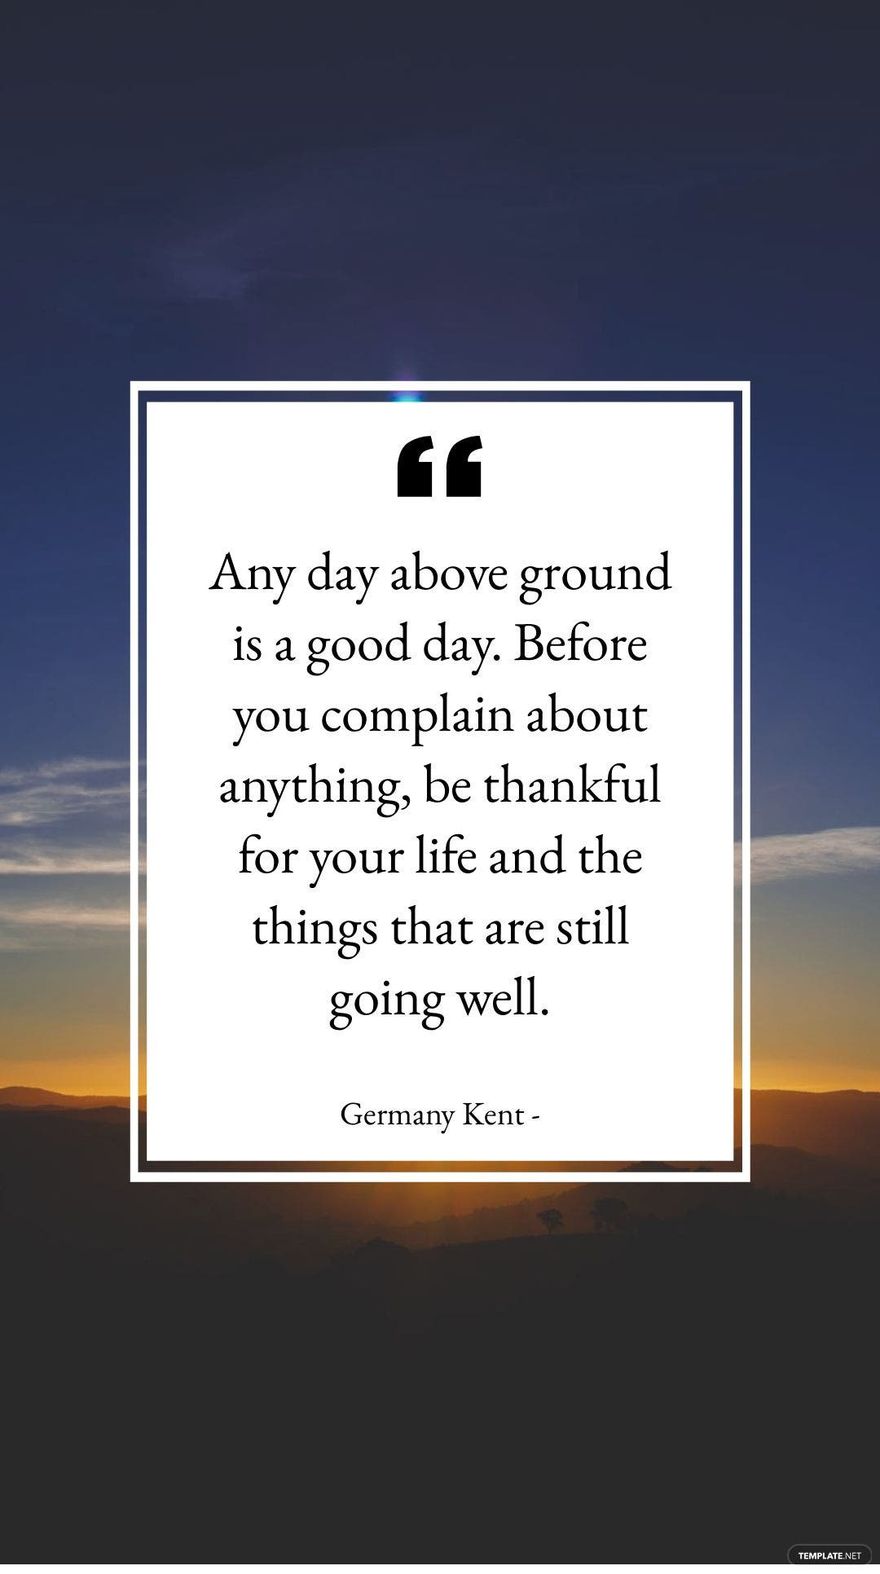 Germany Kent -Any day above ground is a good day. Before you complain about anything, be thankful for your life and the things that are still going well.